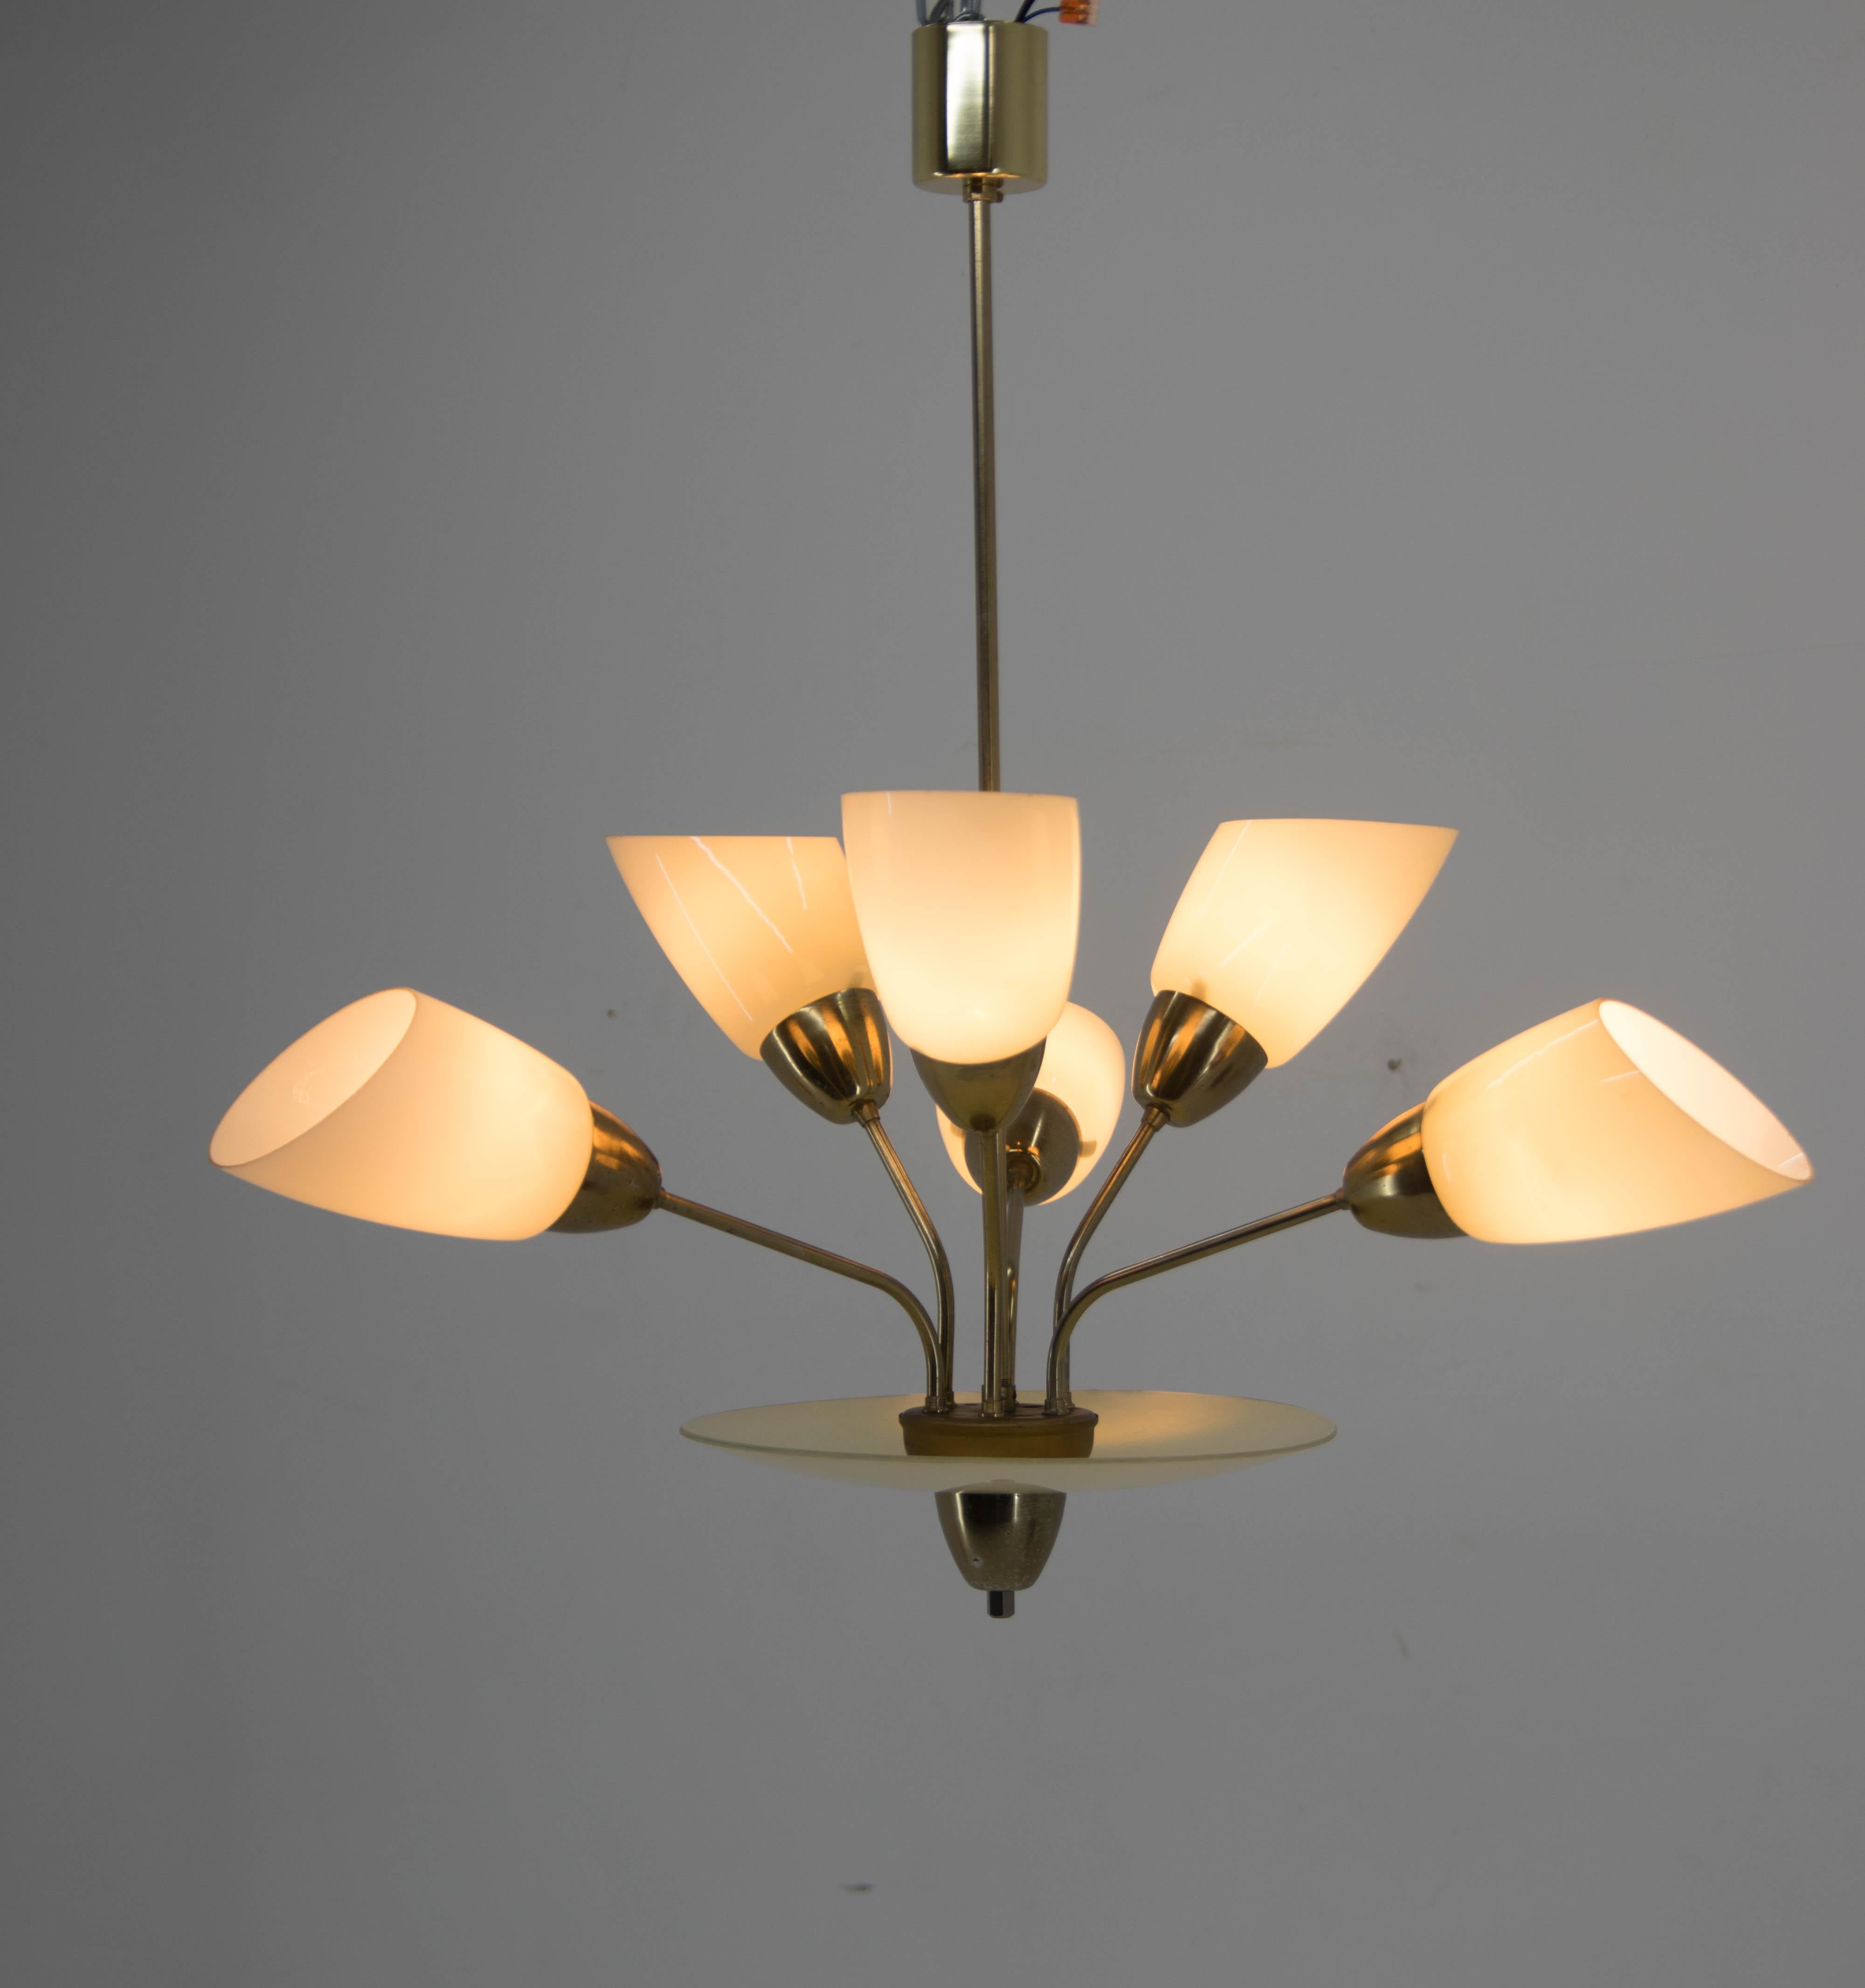 Design Mid-century 6-flamming chandelier chandelier.
Made of brass and glass.
Brass with some age patina, glass in perfect condition.
Cleaned, rewired: 3+3x40W, E25-E27 bulbs
US wiring compatible